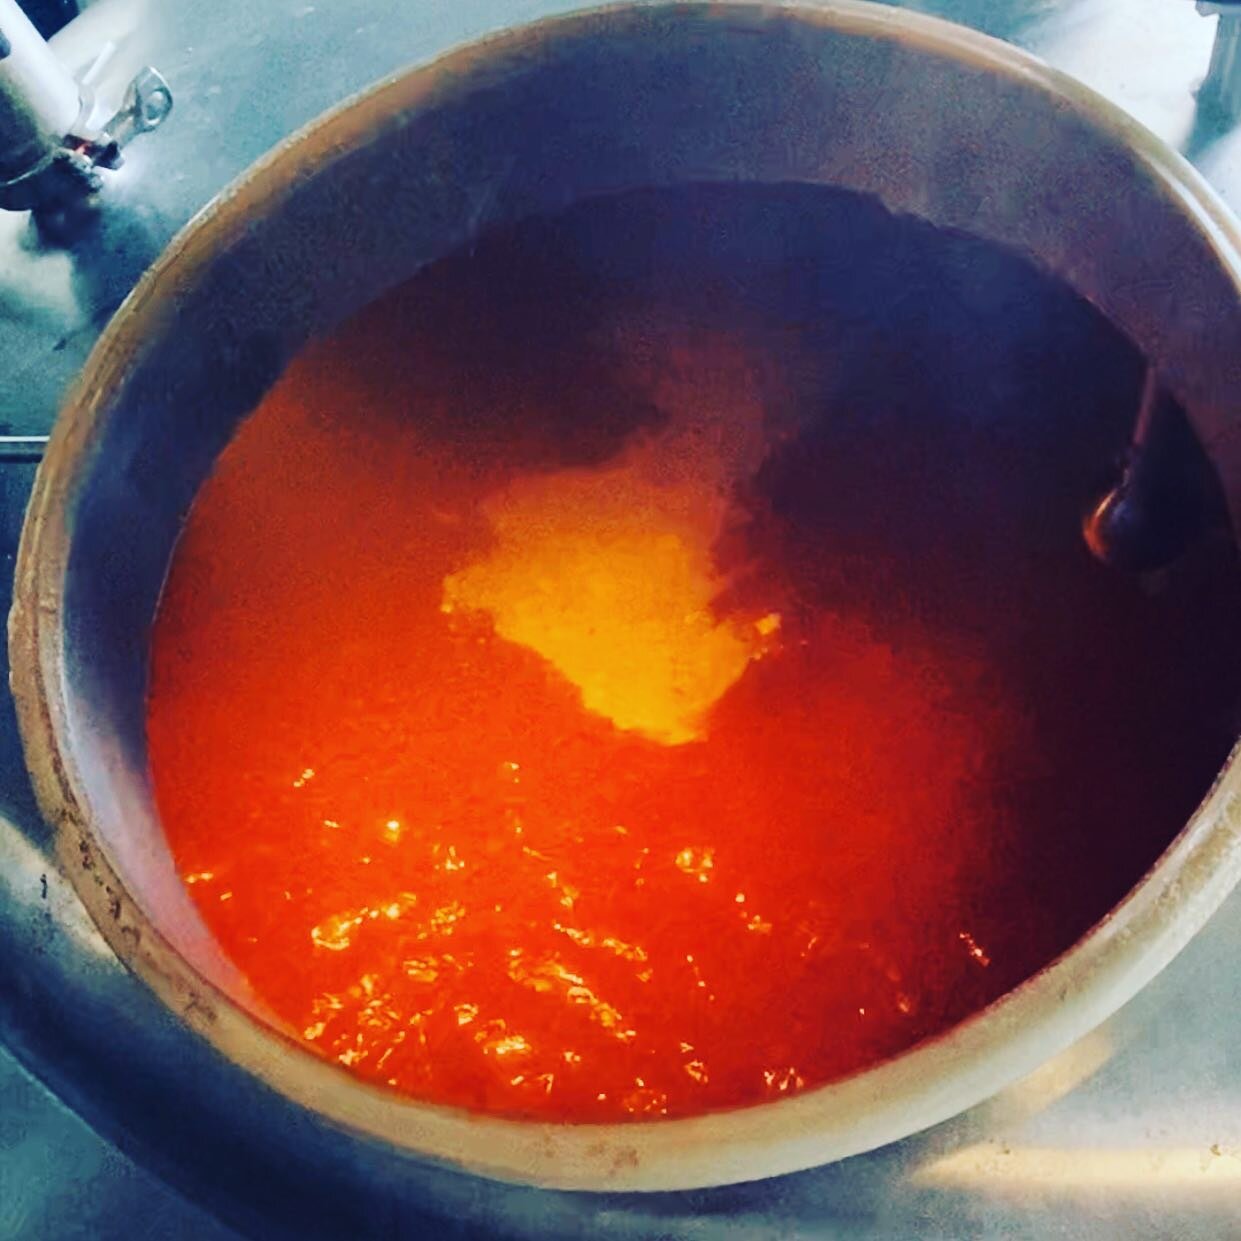 Our Oktoberfest is officially brewing 🙌🏾🙌🏽🙌🏼 give this baby about a month and we&rsquo;ll give you a perfect m&auml;rzen style beer that will hint at sweetness, but the rich, bready, toasty malts will lead to a moderately bitter and dry finish.